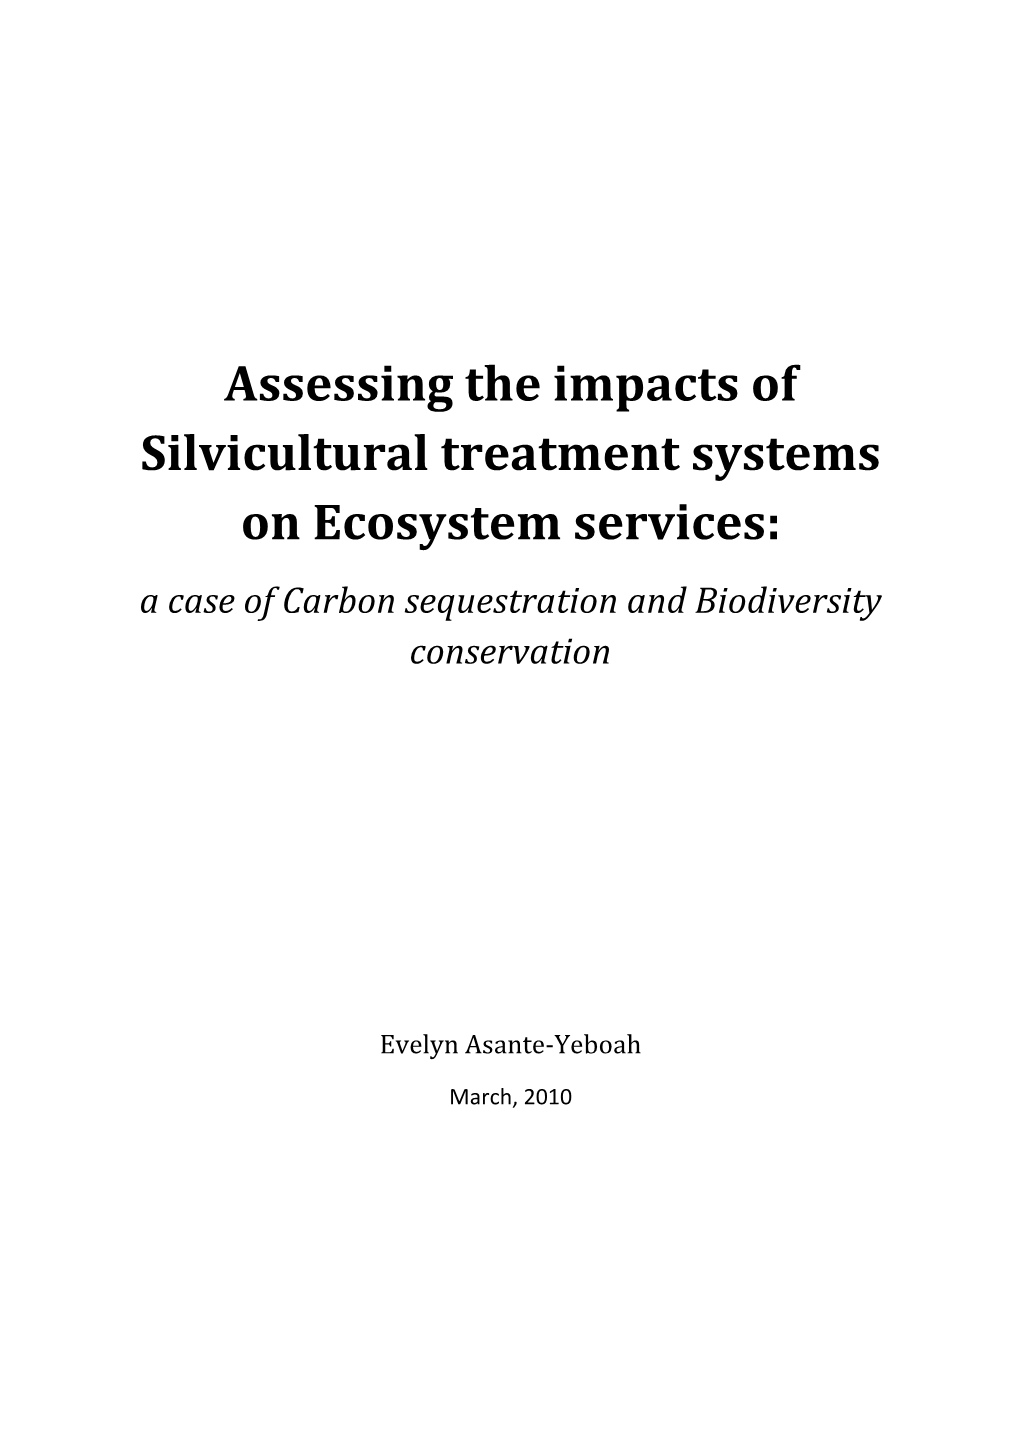 Assessing the Impacts of Silvicultural Treatment Systems on Ecosystem Services: a Case of Carbon Sequestration and Biodiversity Conservation